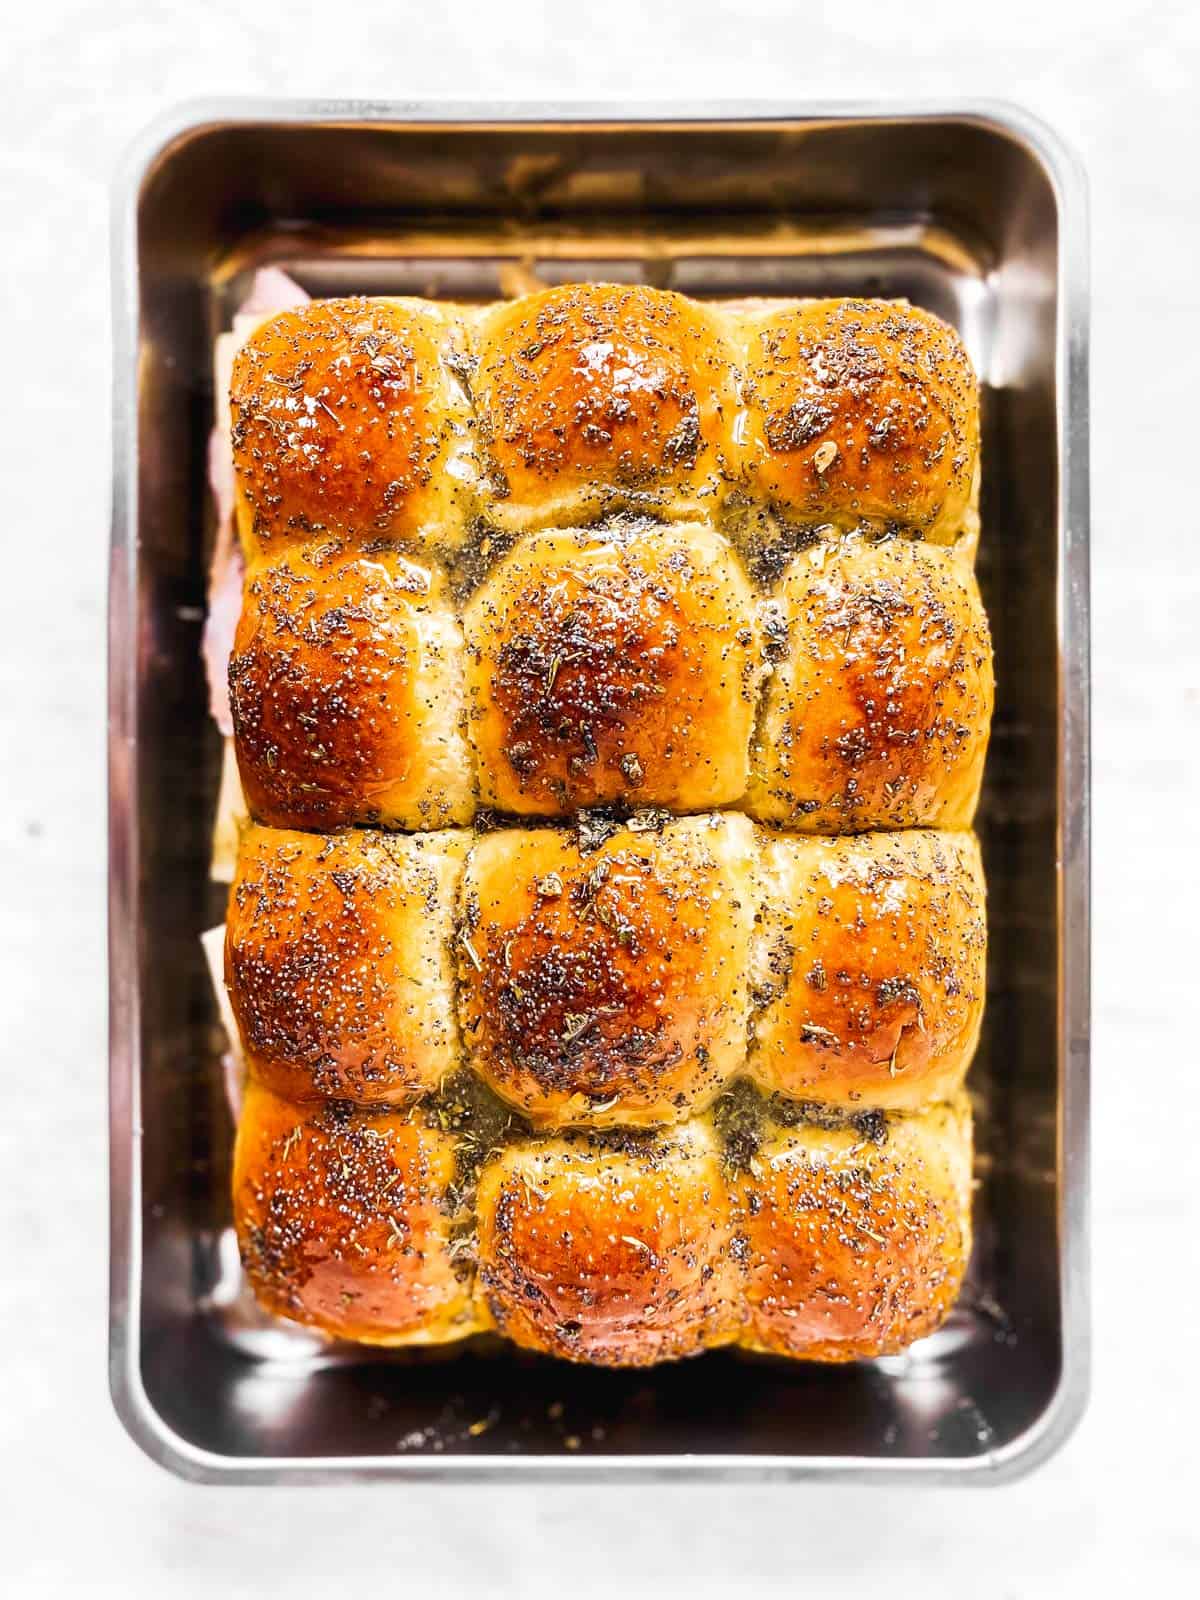 dinner rolls topped with poppy seeds and dried herbs